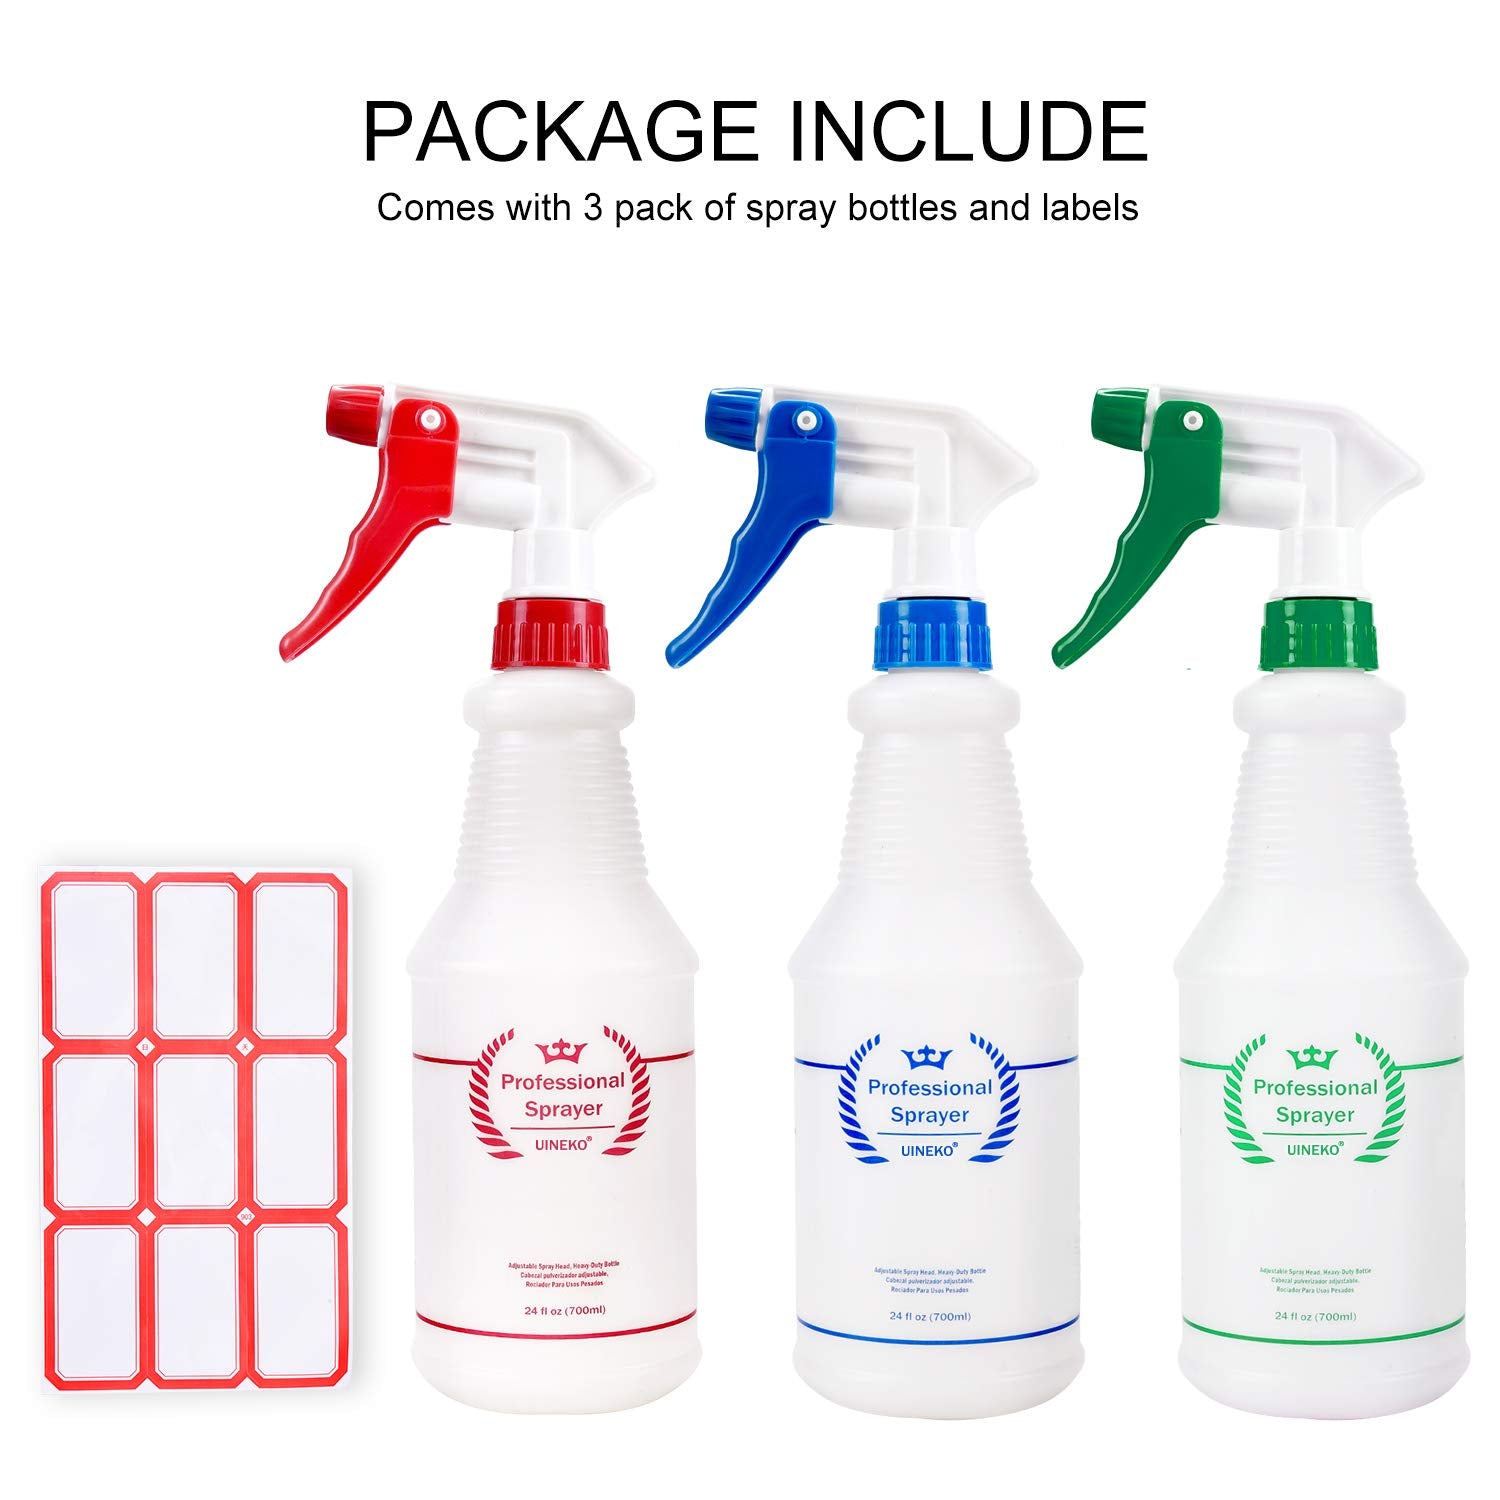 Professional Plastic Spray Bottles For Cleaning Solutions Leak Proof  Technology Empty 500 Ml/16 Oz Value Pack Of 2